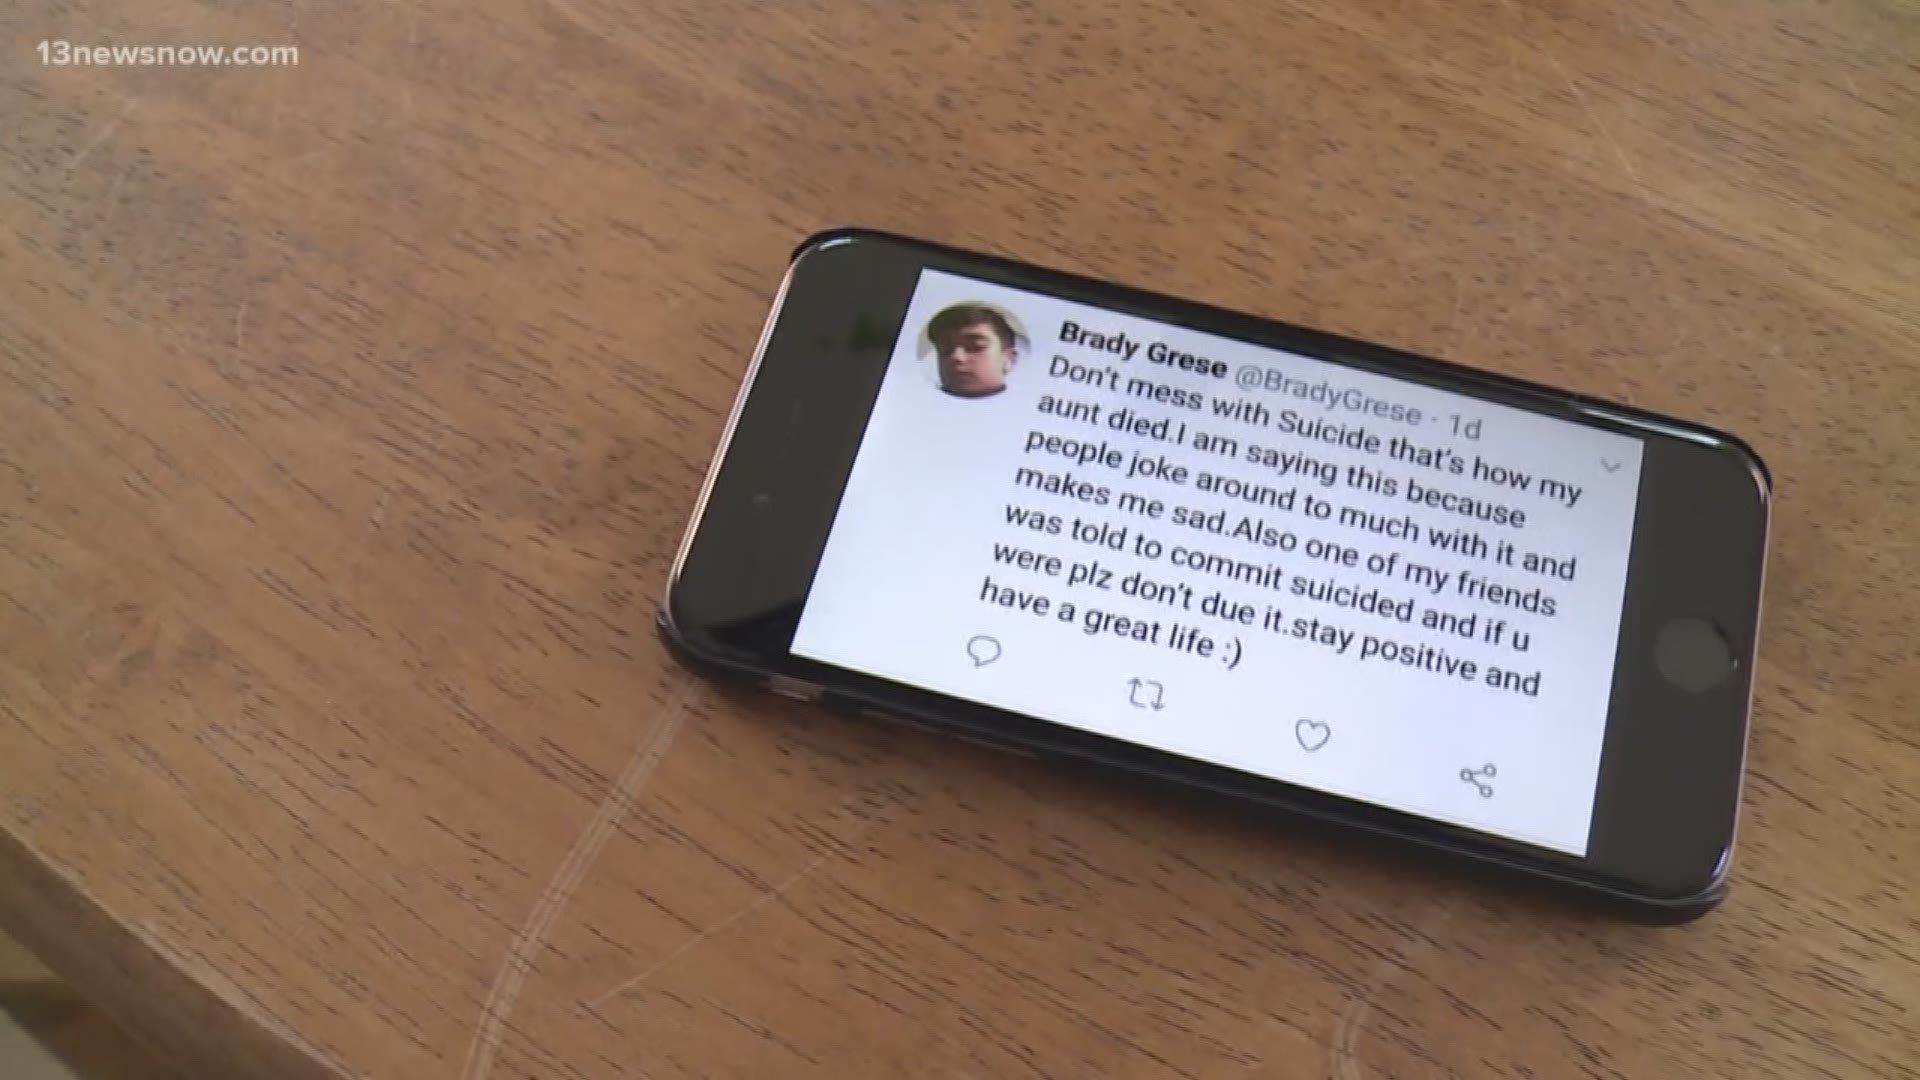 An 11-year-old created a secret Twitter account to help a friend who was being bullied and told to commit suicide. He used the account to fight against bullying and for suicide prevention.